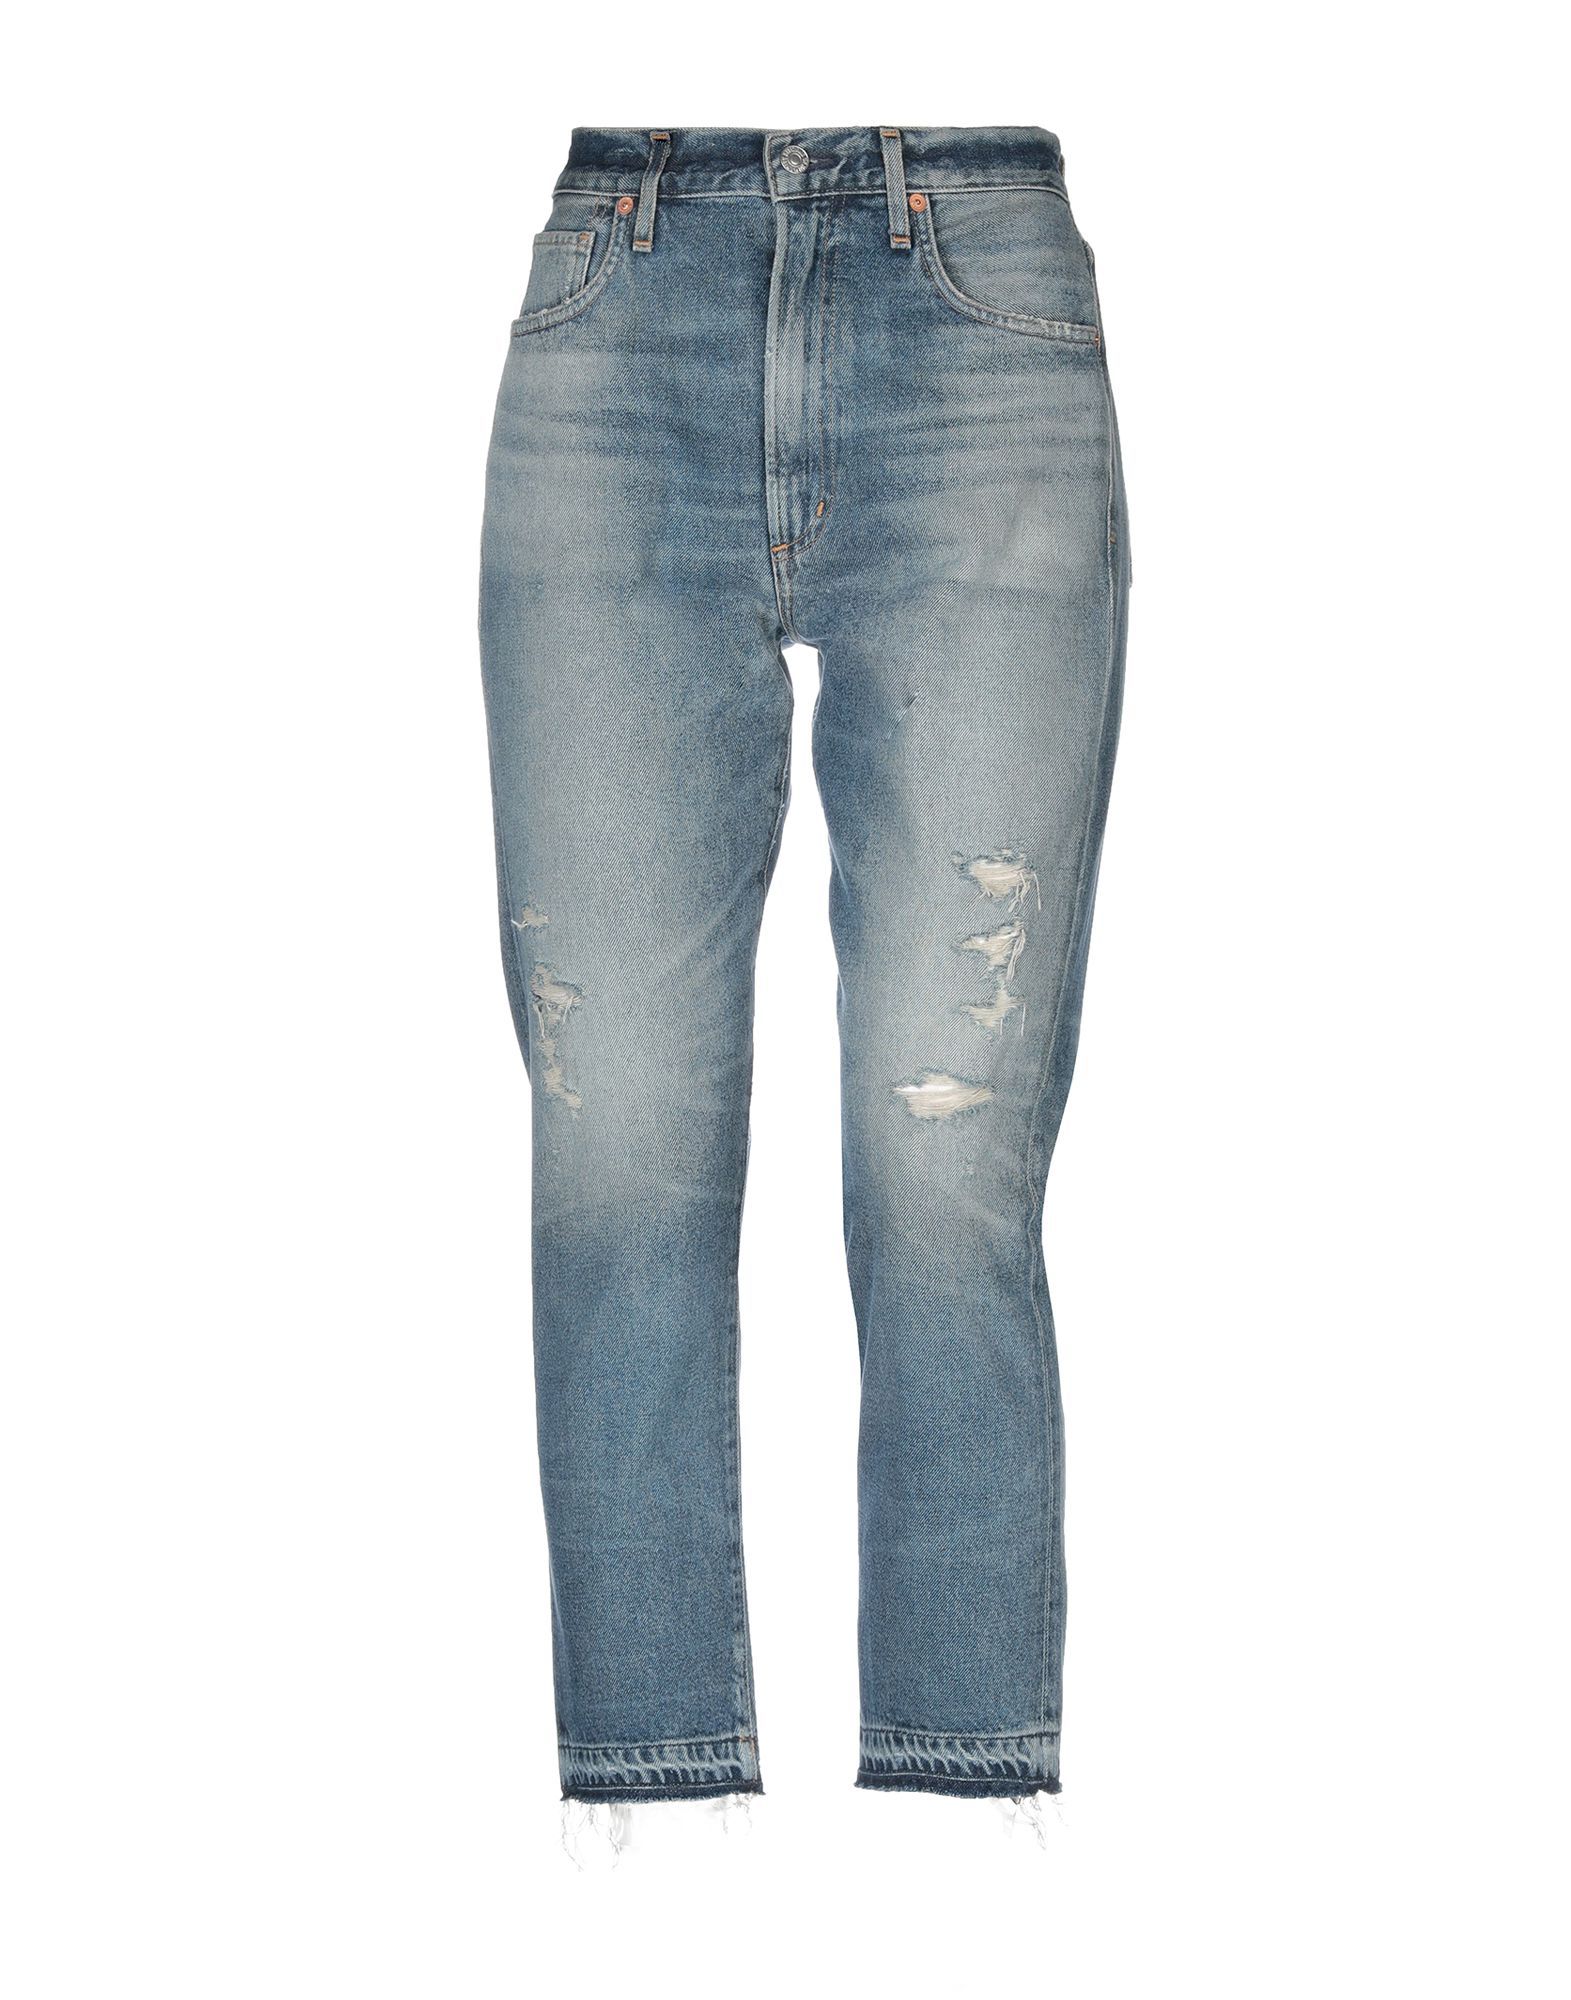 CITIZENS OF HUMANITY Jeans | YOOX (US)